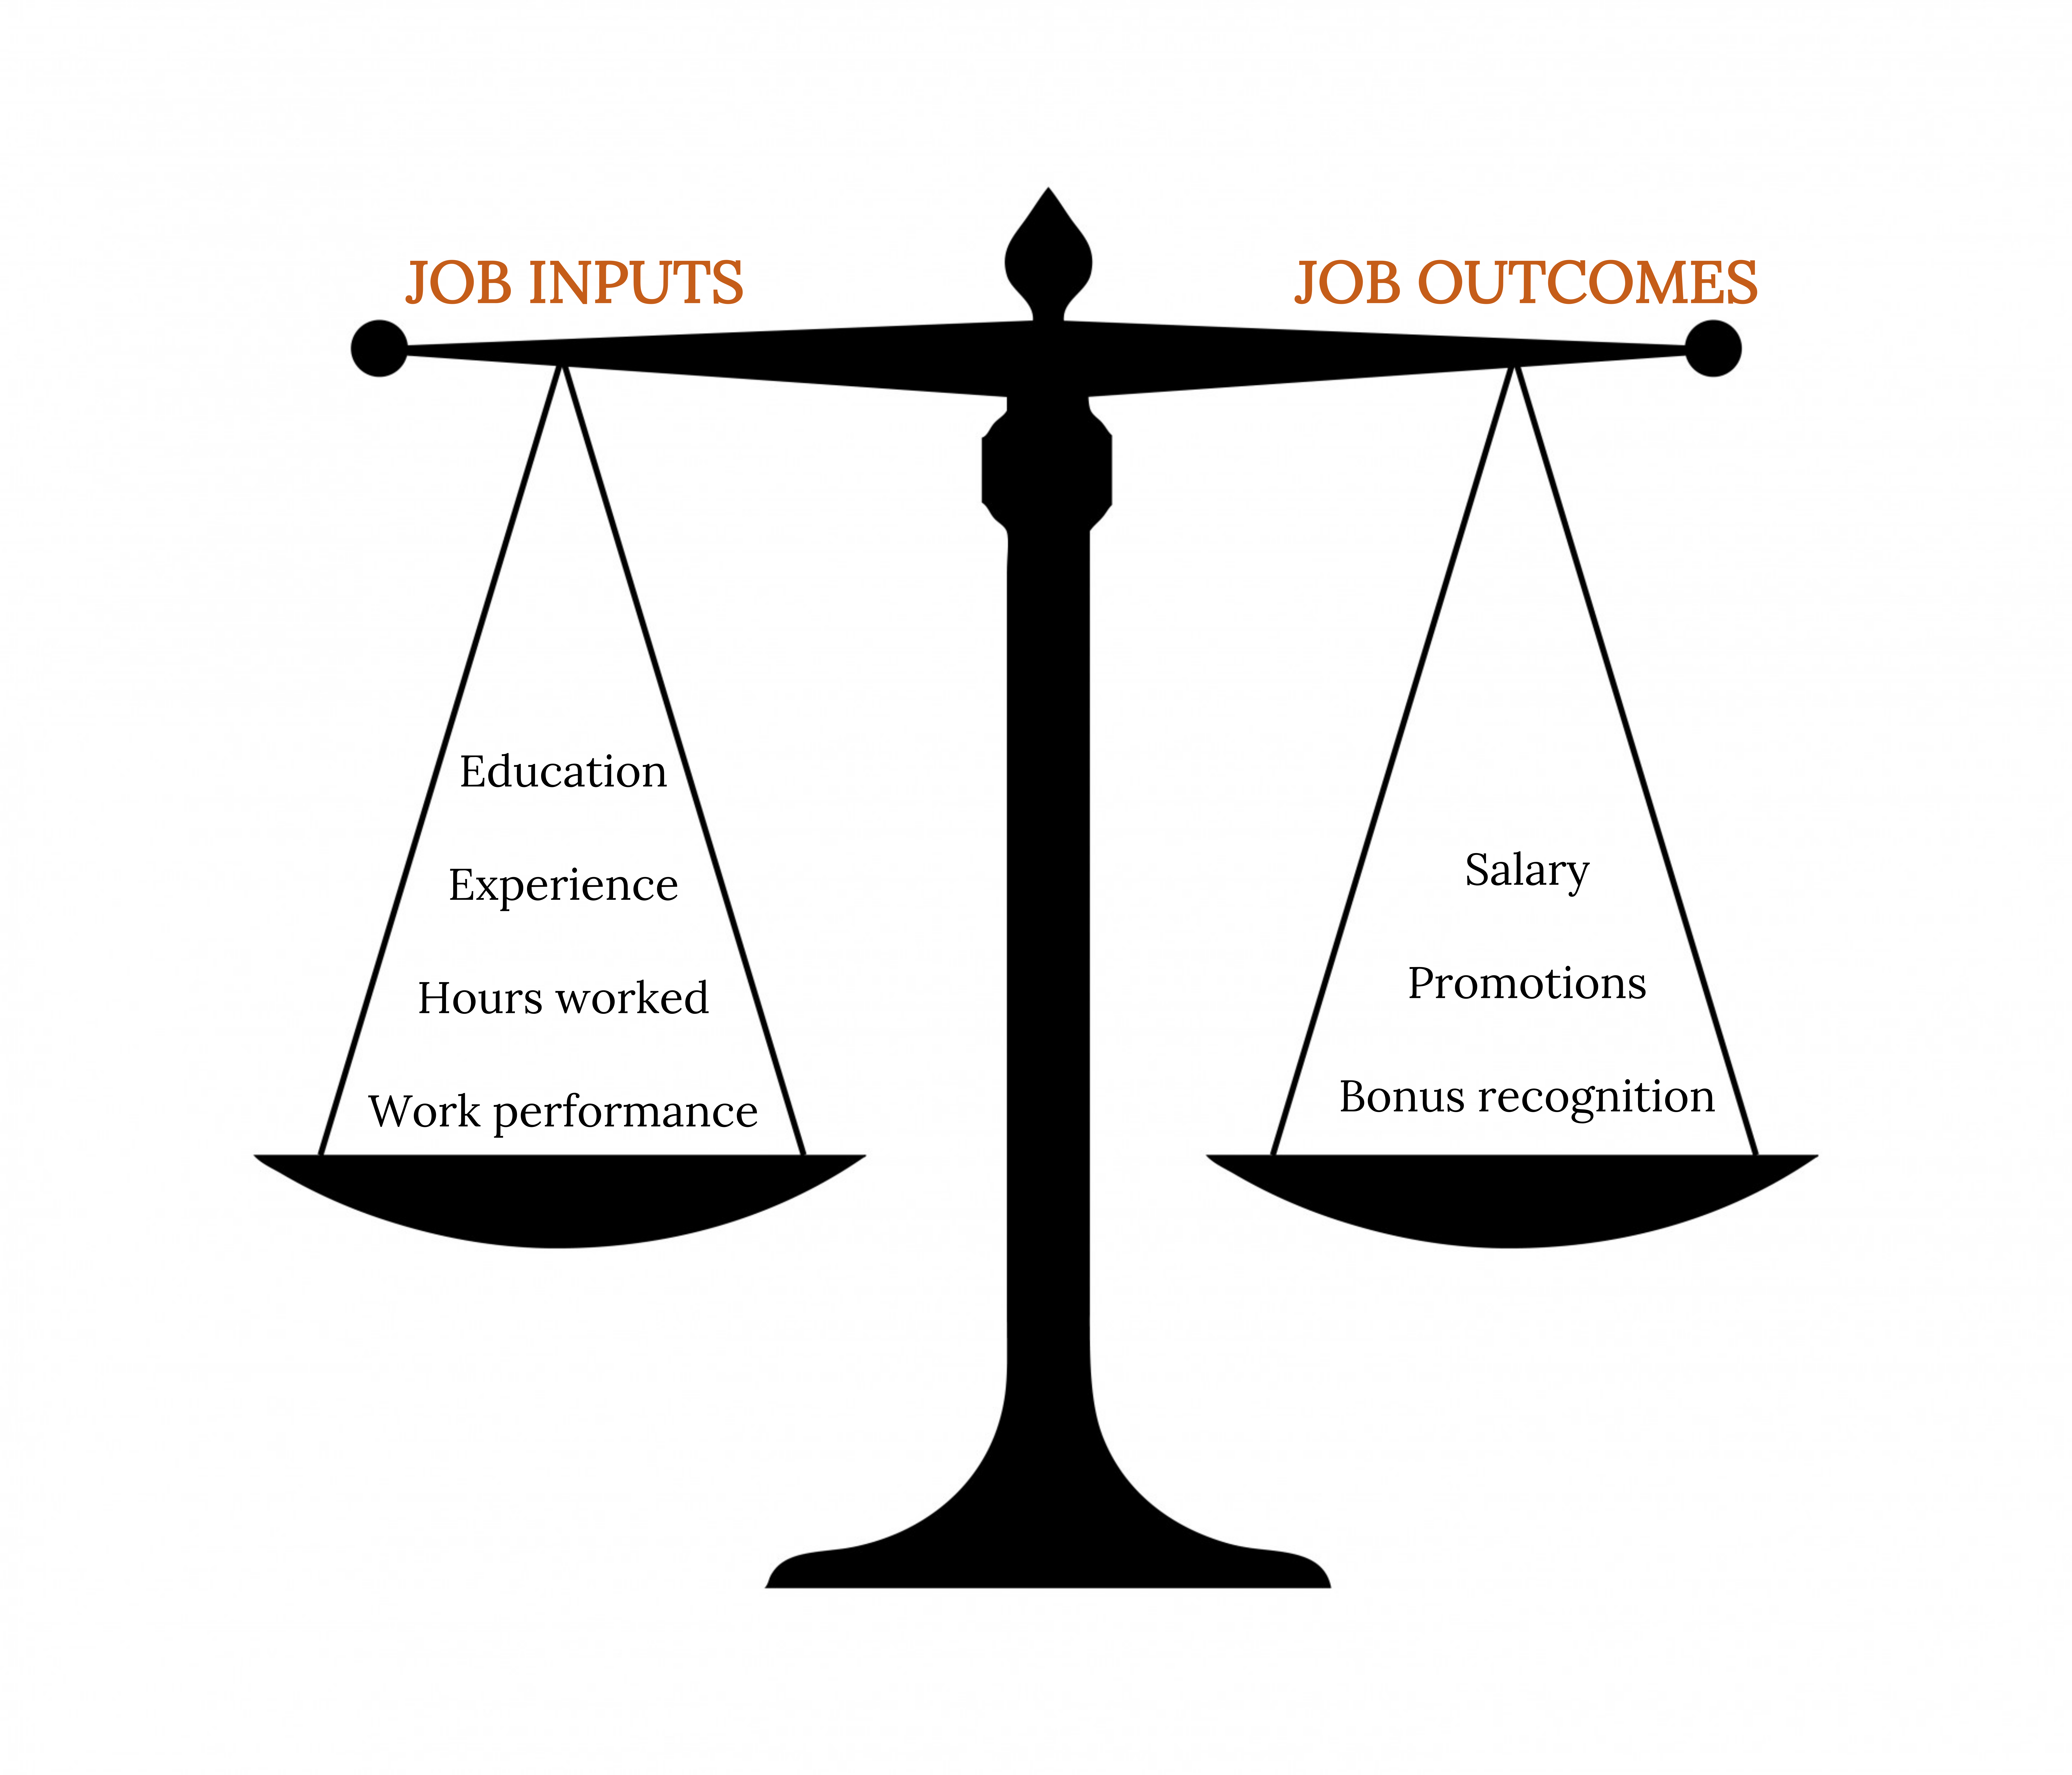 Balanced scale weighing job inputs on the left and job outcomes on the right. Inputs: education, experience, hours worked, and work performance. Outcomes: salary, promotions, and bonus recognition.